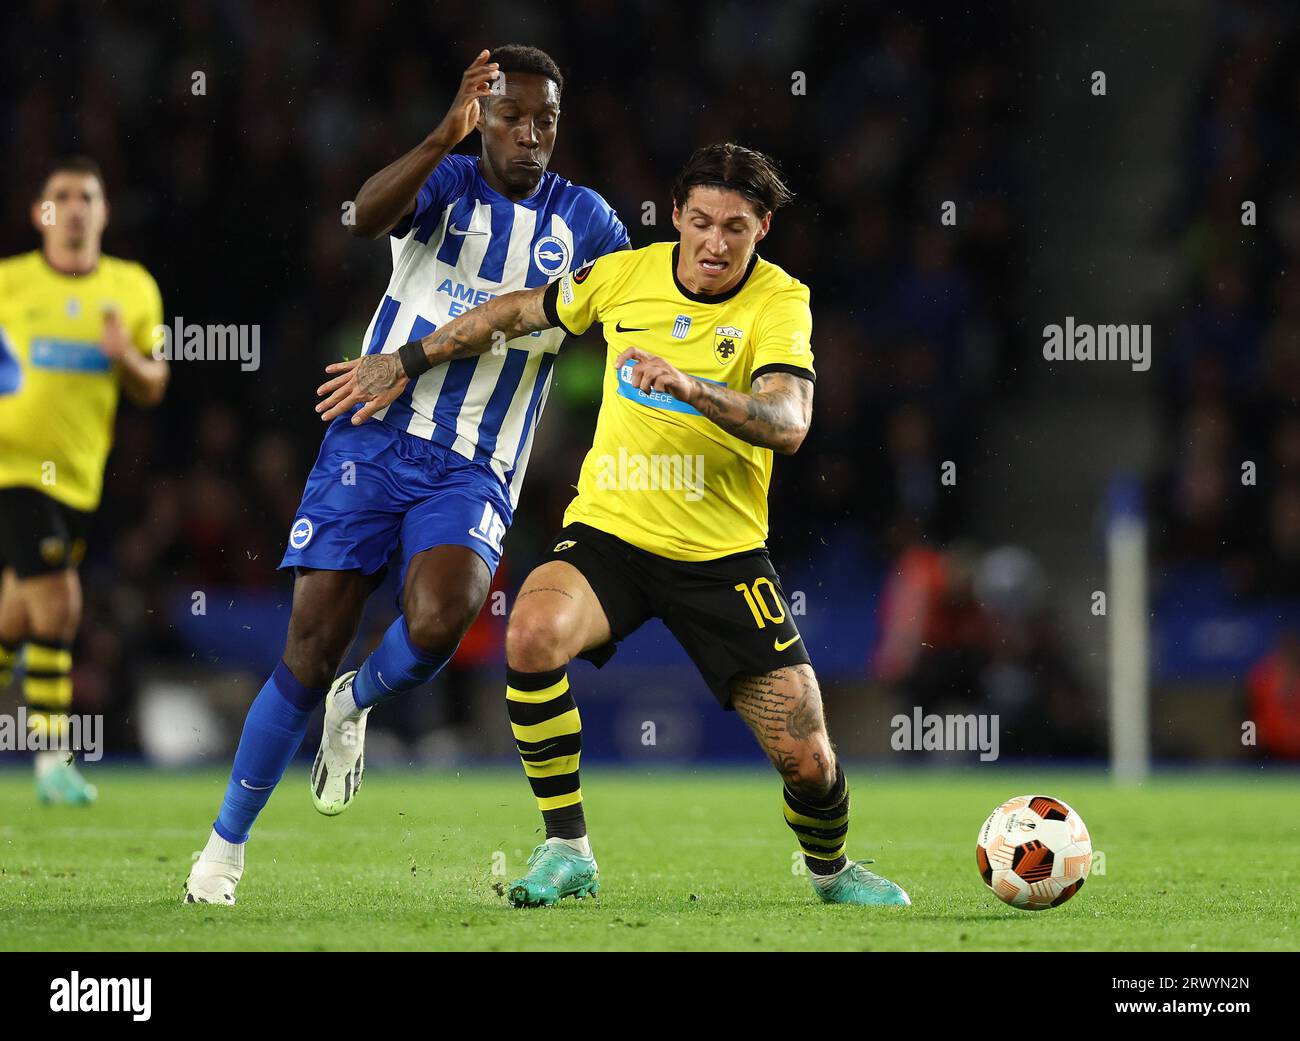 Brighton and Hove, UK. 21st Sep, 2023. Danny Welbeck of Brighton and Hove Albion and Steven Zuber of AEK Athens challenge for the ball during the UEFA Europa League match at the AMEX Stadium, Brighton and Hove. Picture credit should read: Paul Terry/Sportimage Credit: Sportimage Ltd/Alamy Live News Stock Photo